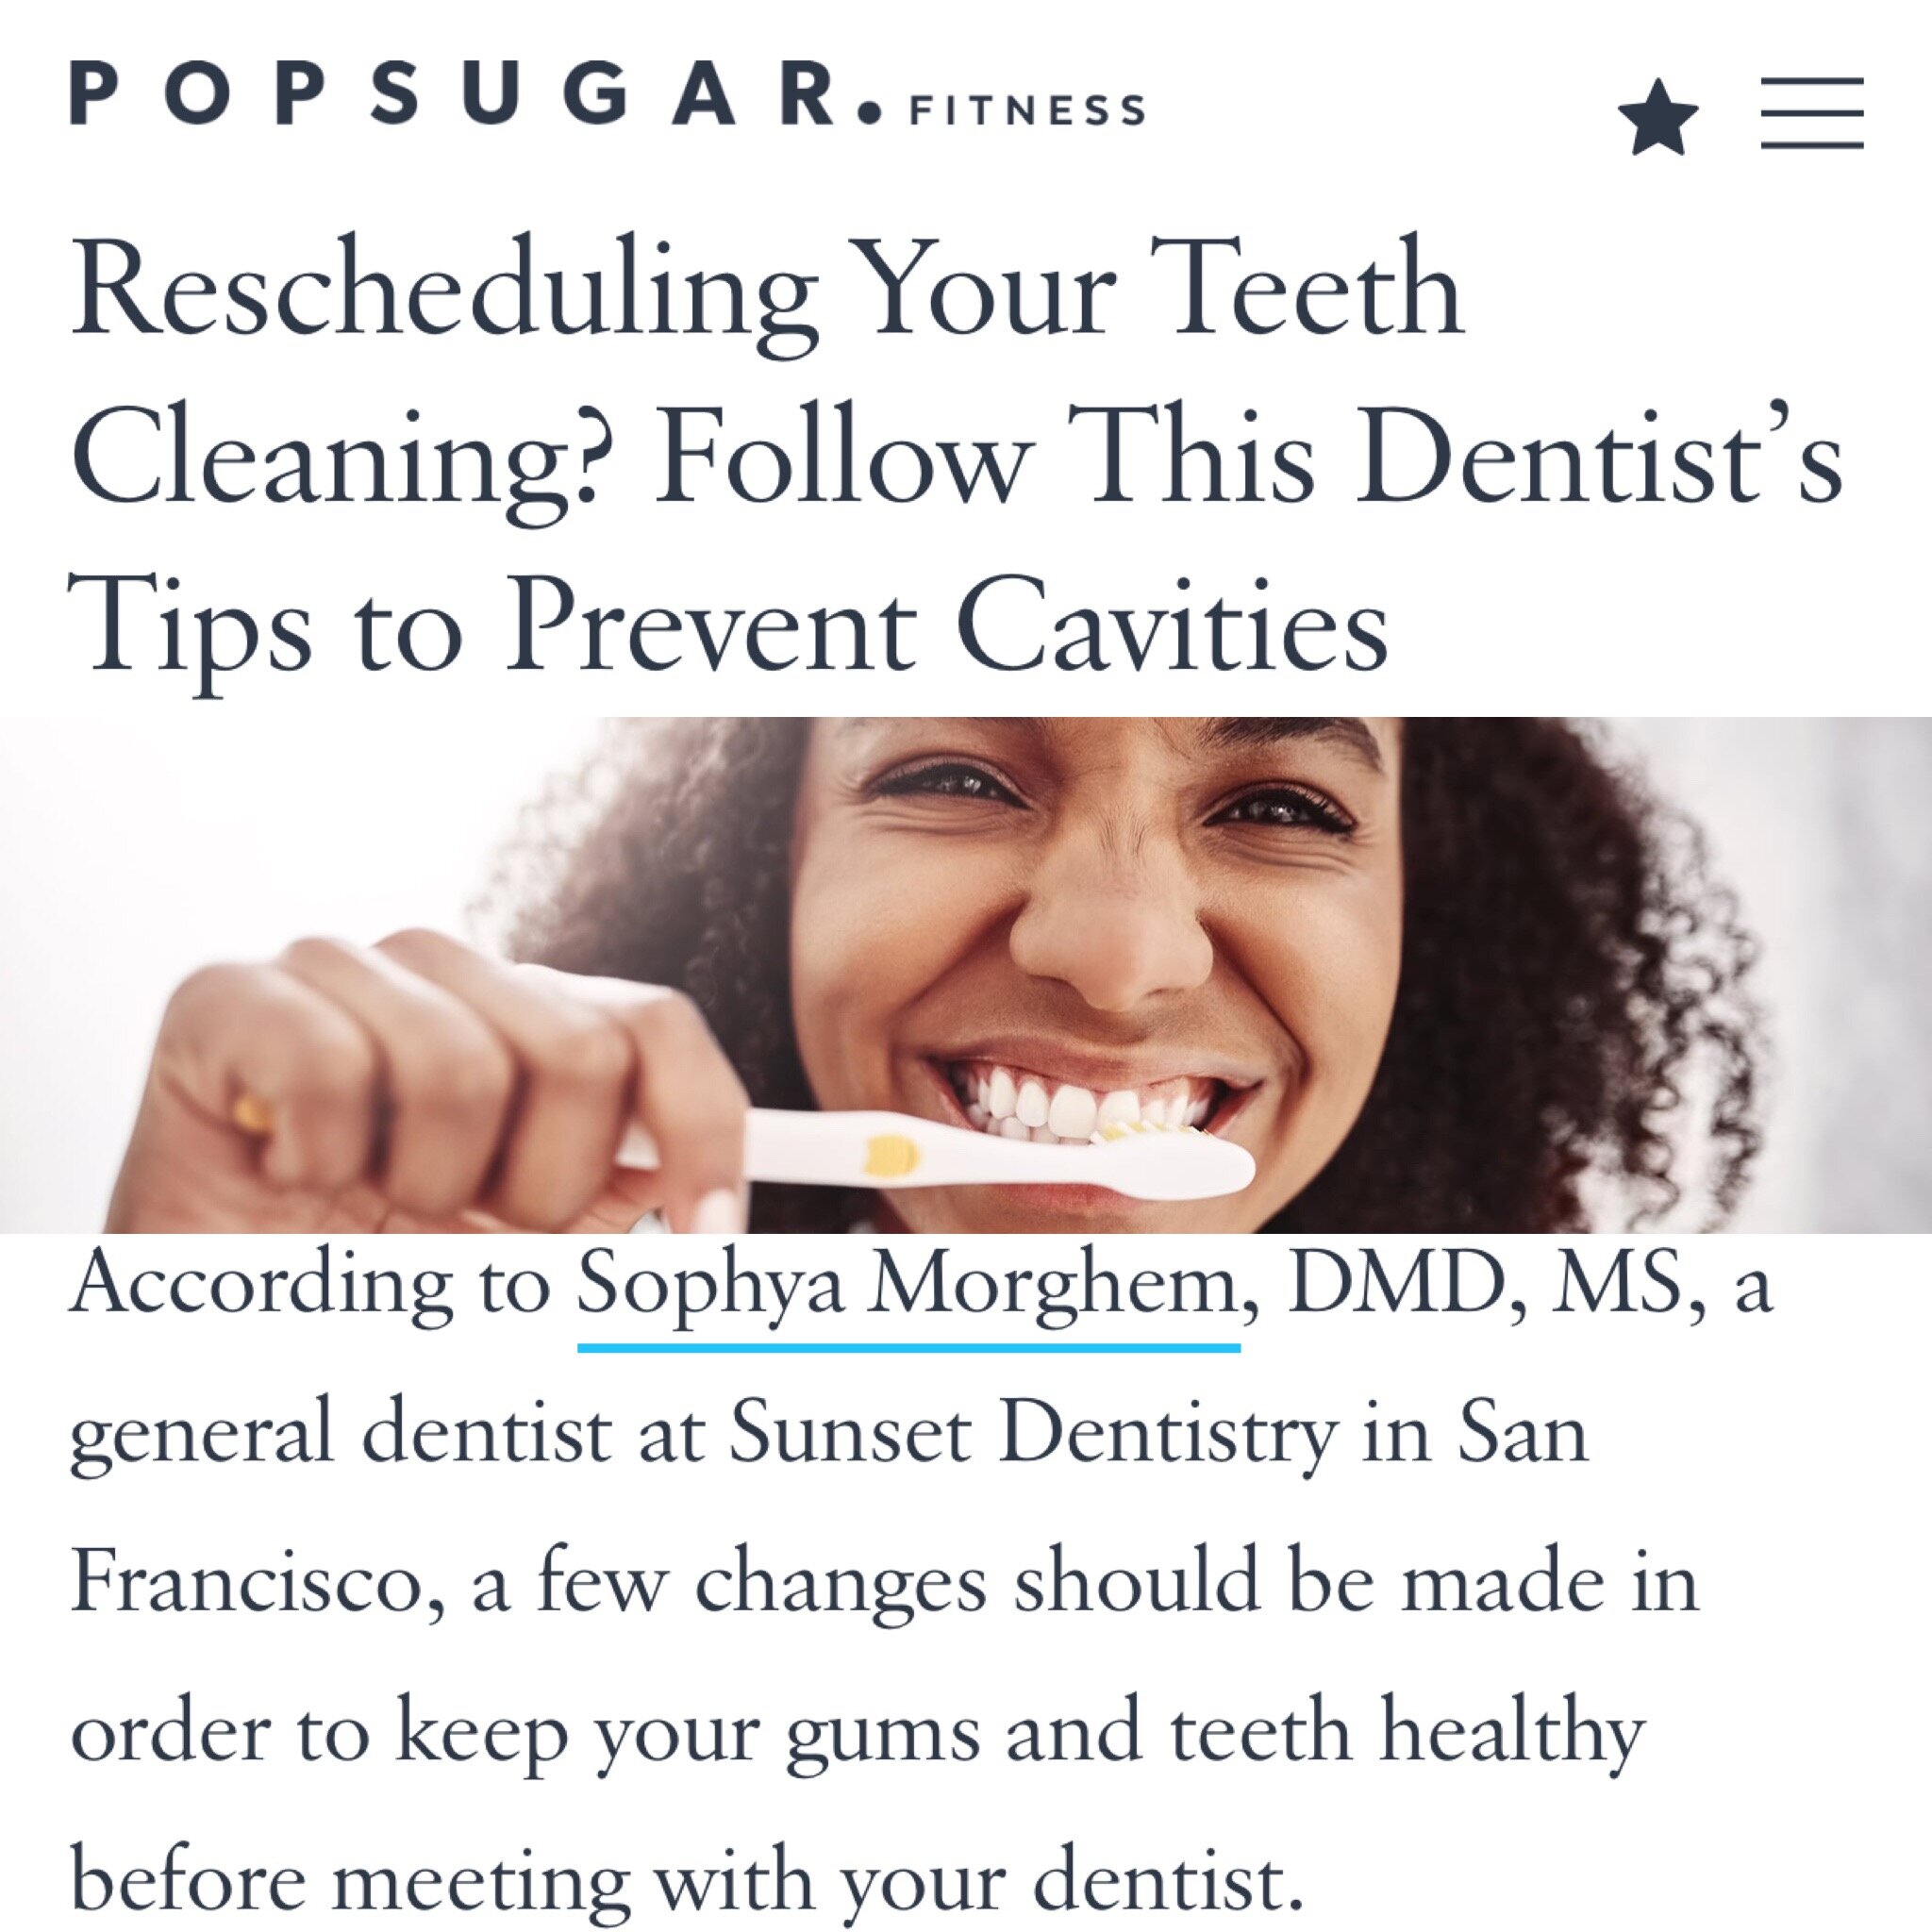 Perfect Your Flossing Technique With These Dentists' Step-by-Step Instructions